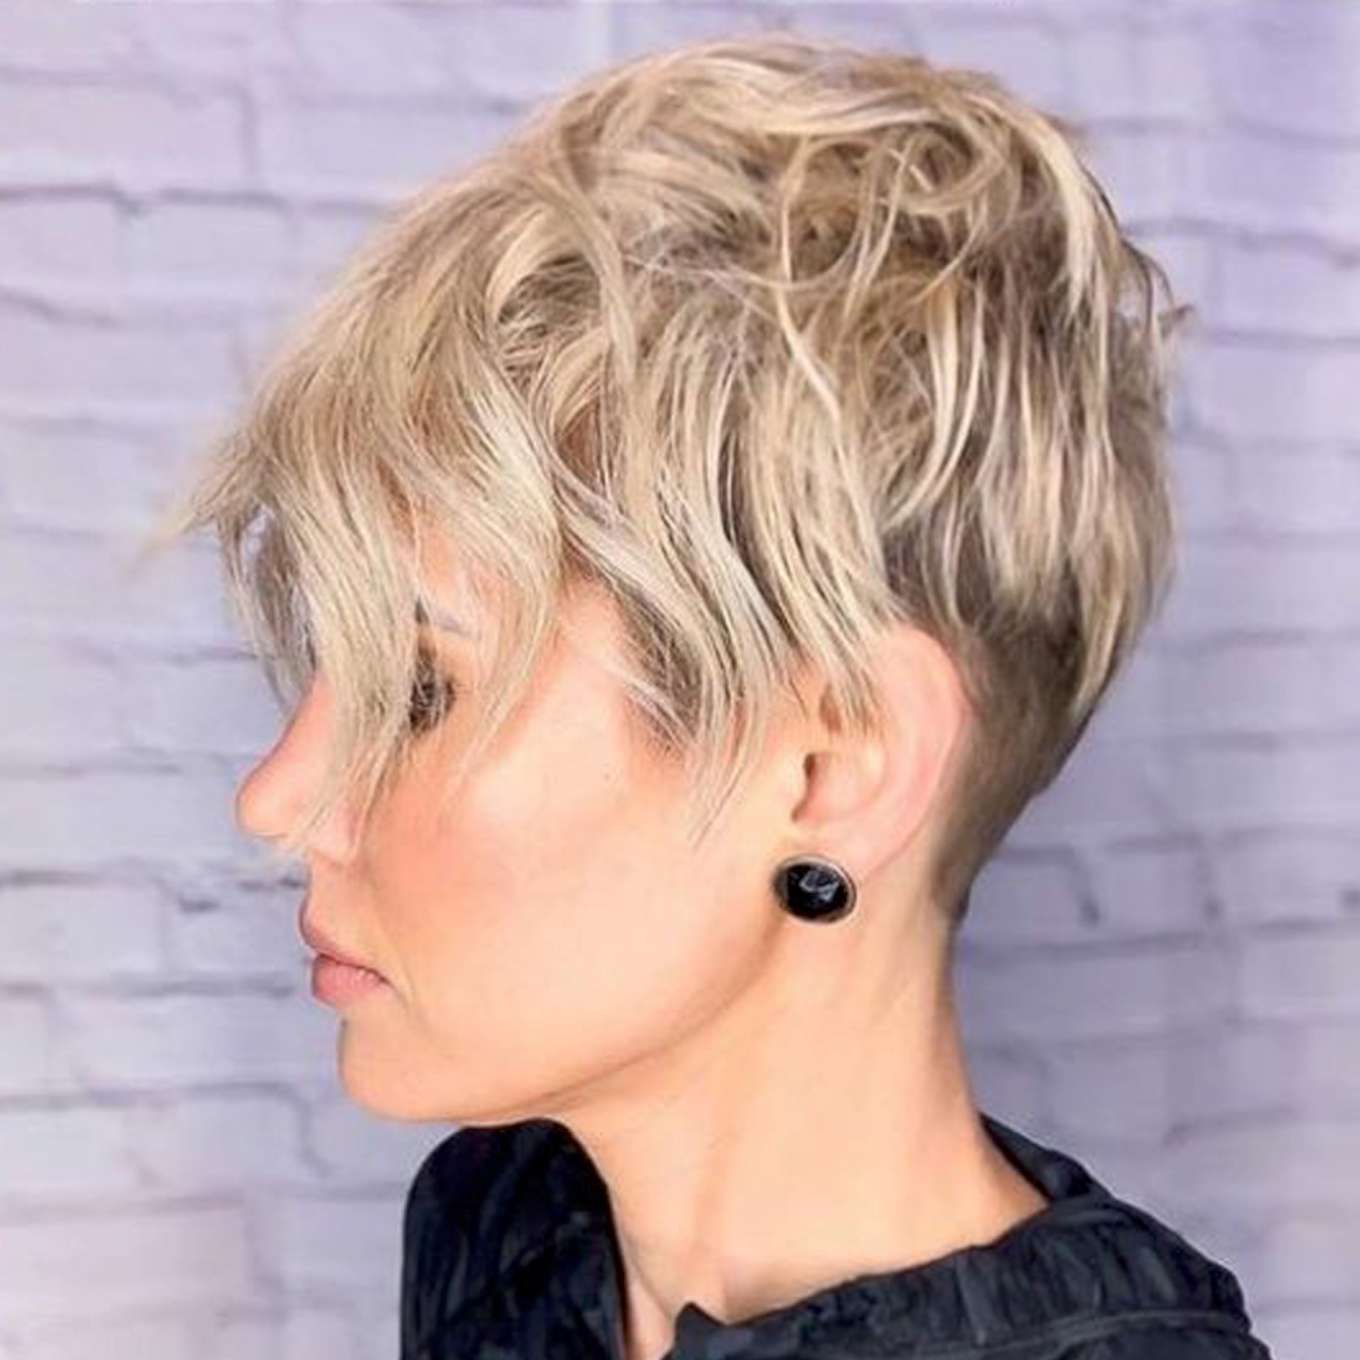 Sofia Rogers Short Hairstyles - 1